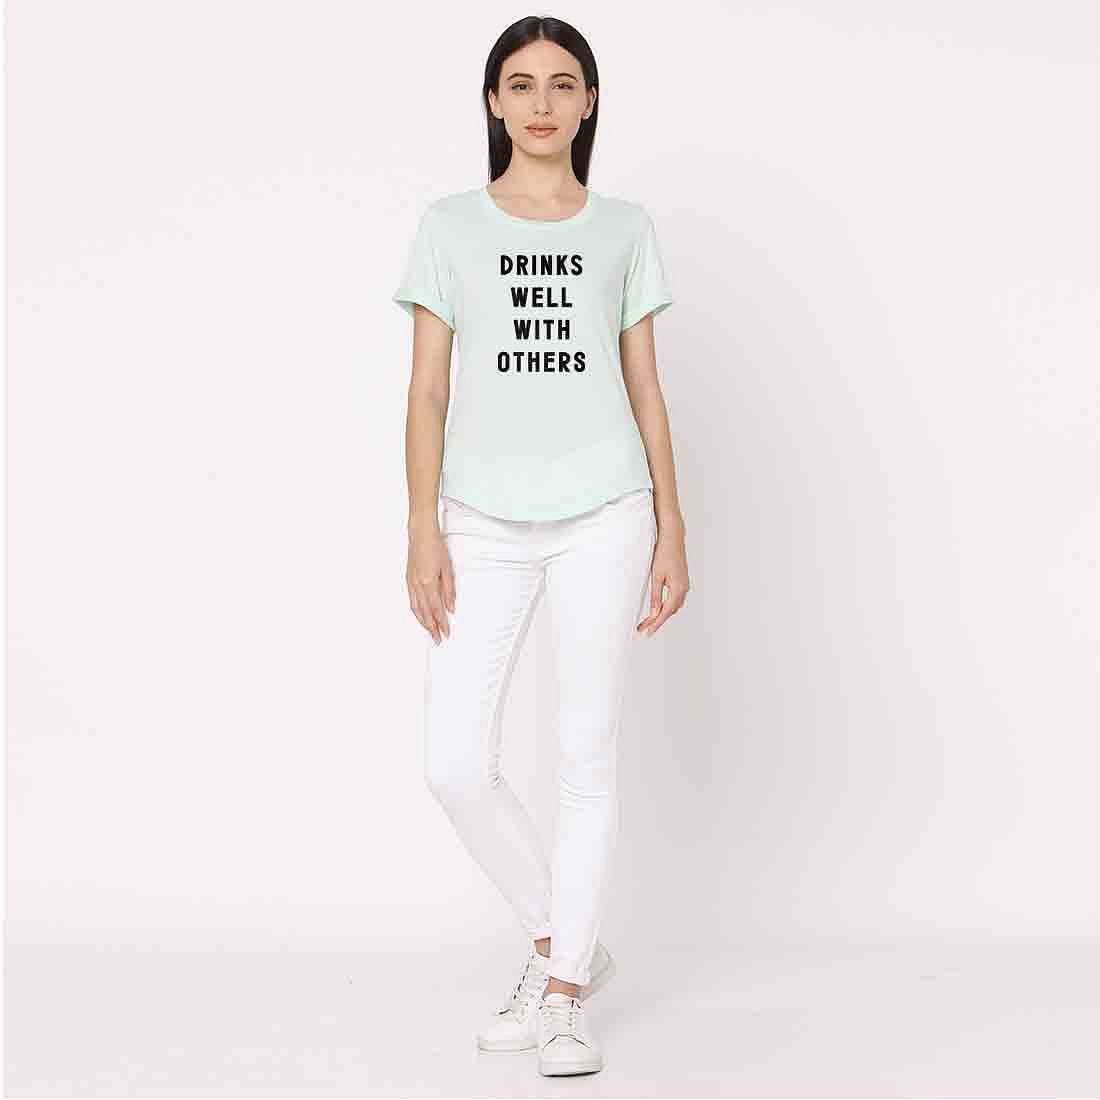 Funny Tshirt For Women Booze Tees  - Drinks Well with Others Nutcase